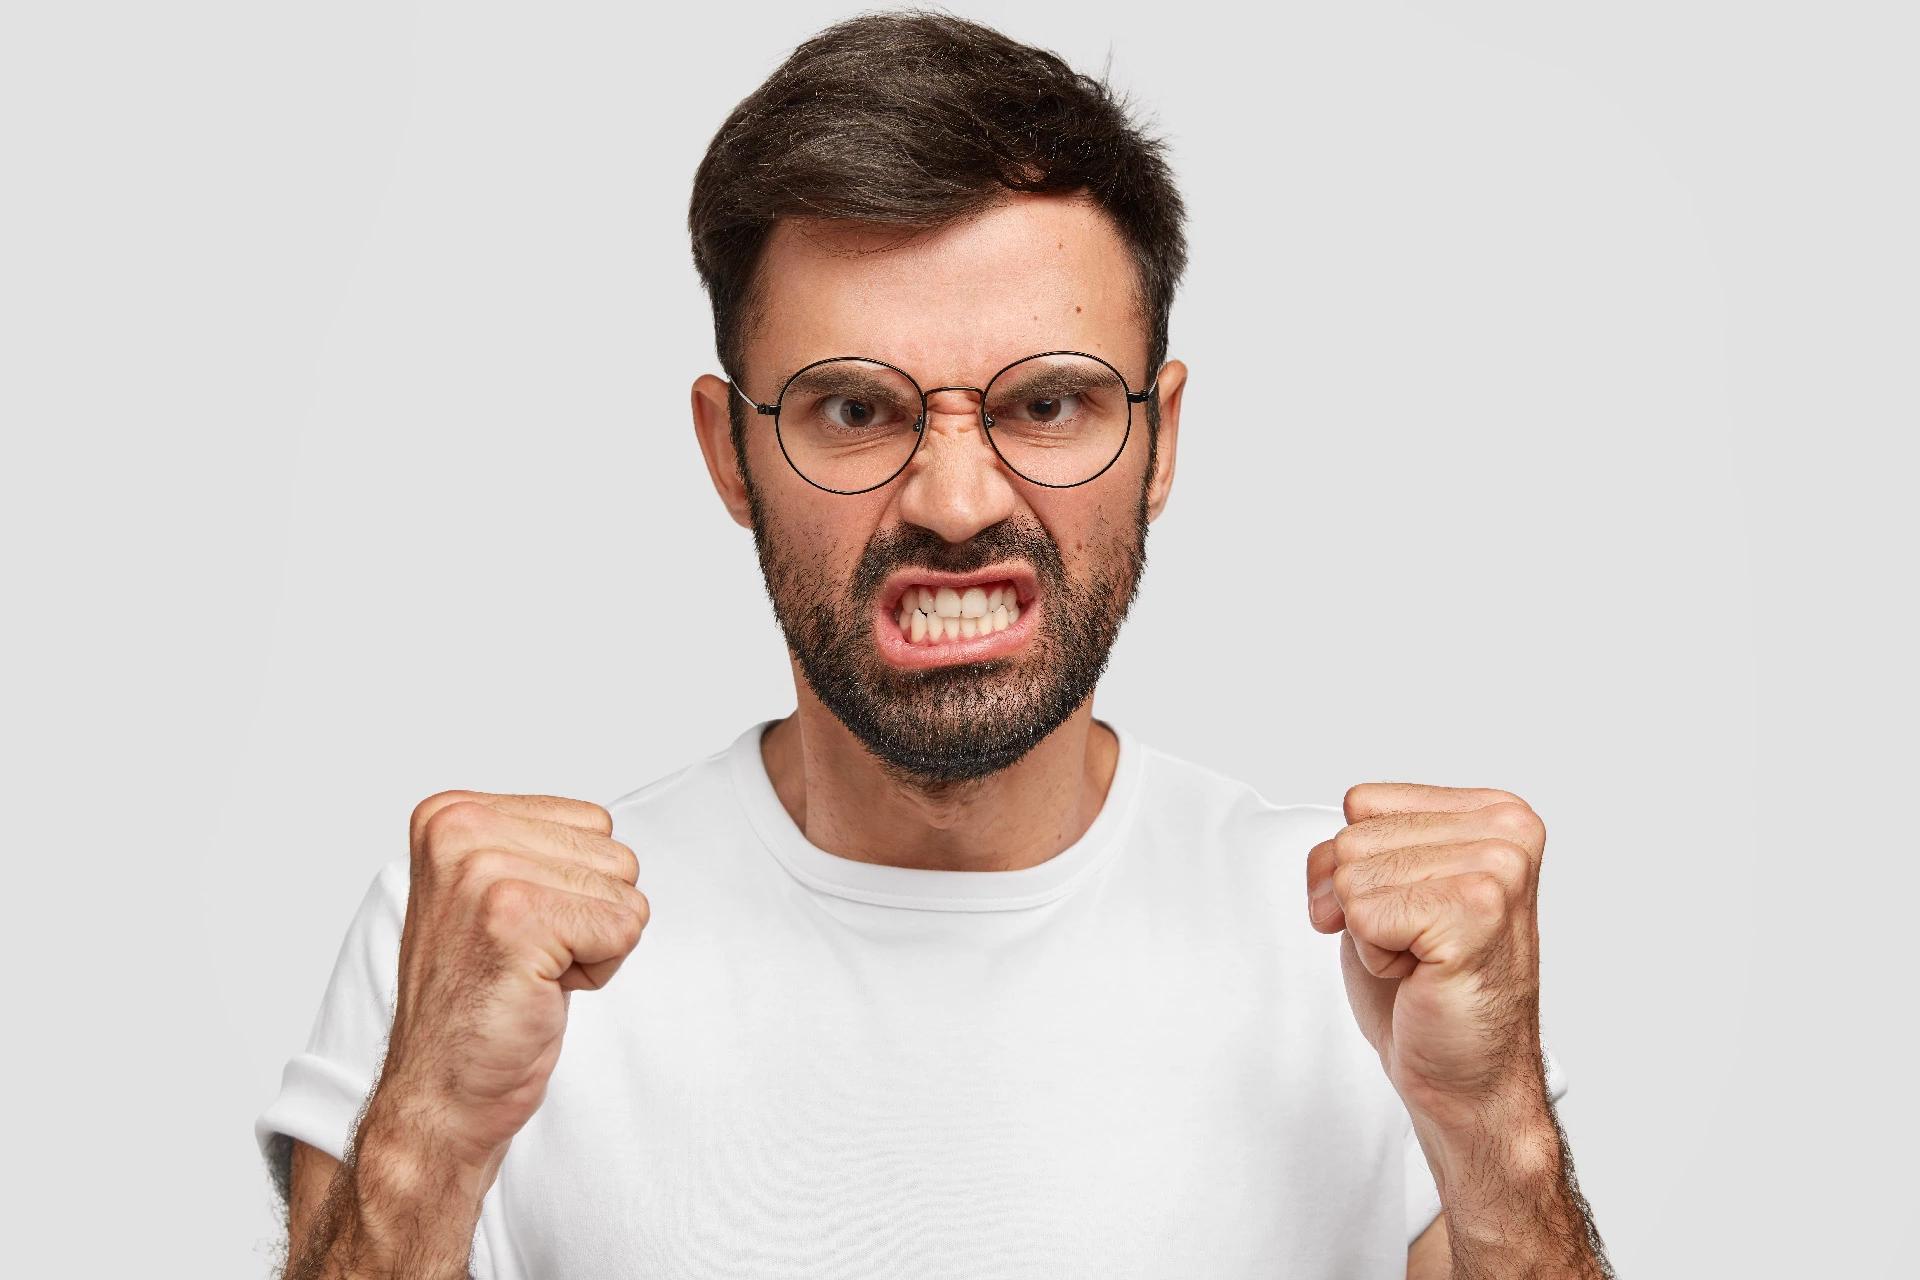 How To Control Anger: 25 Useful Tips To Control Anger